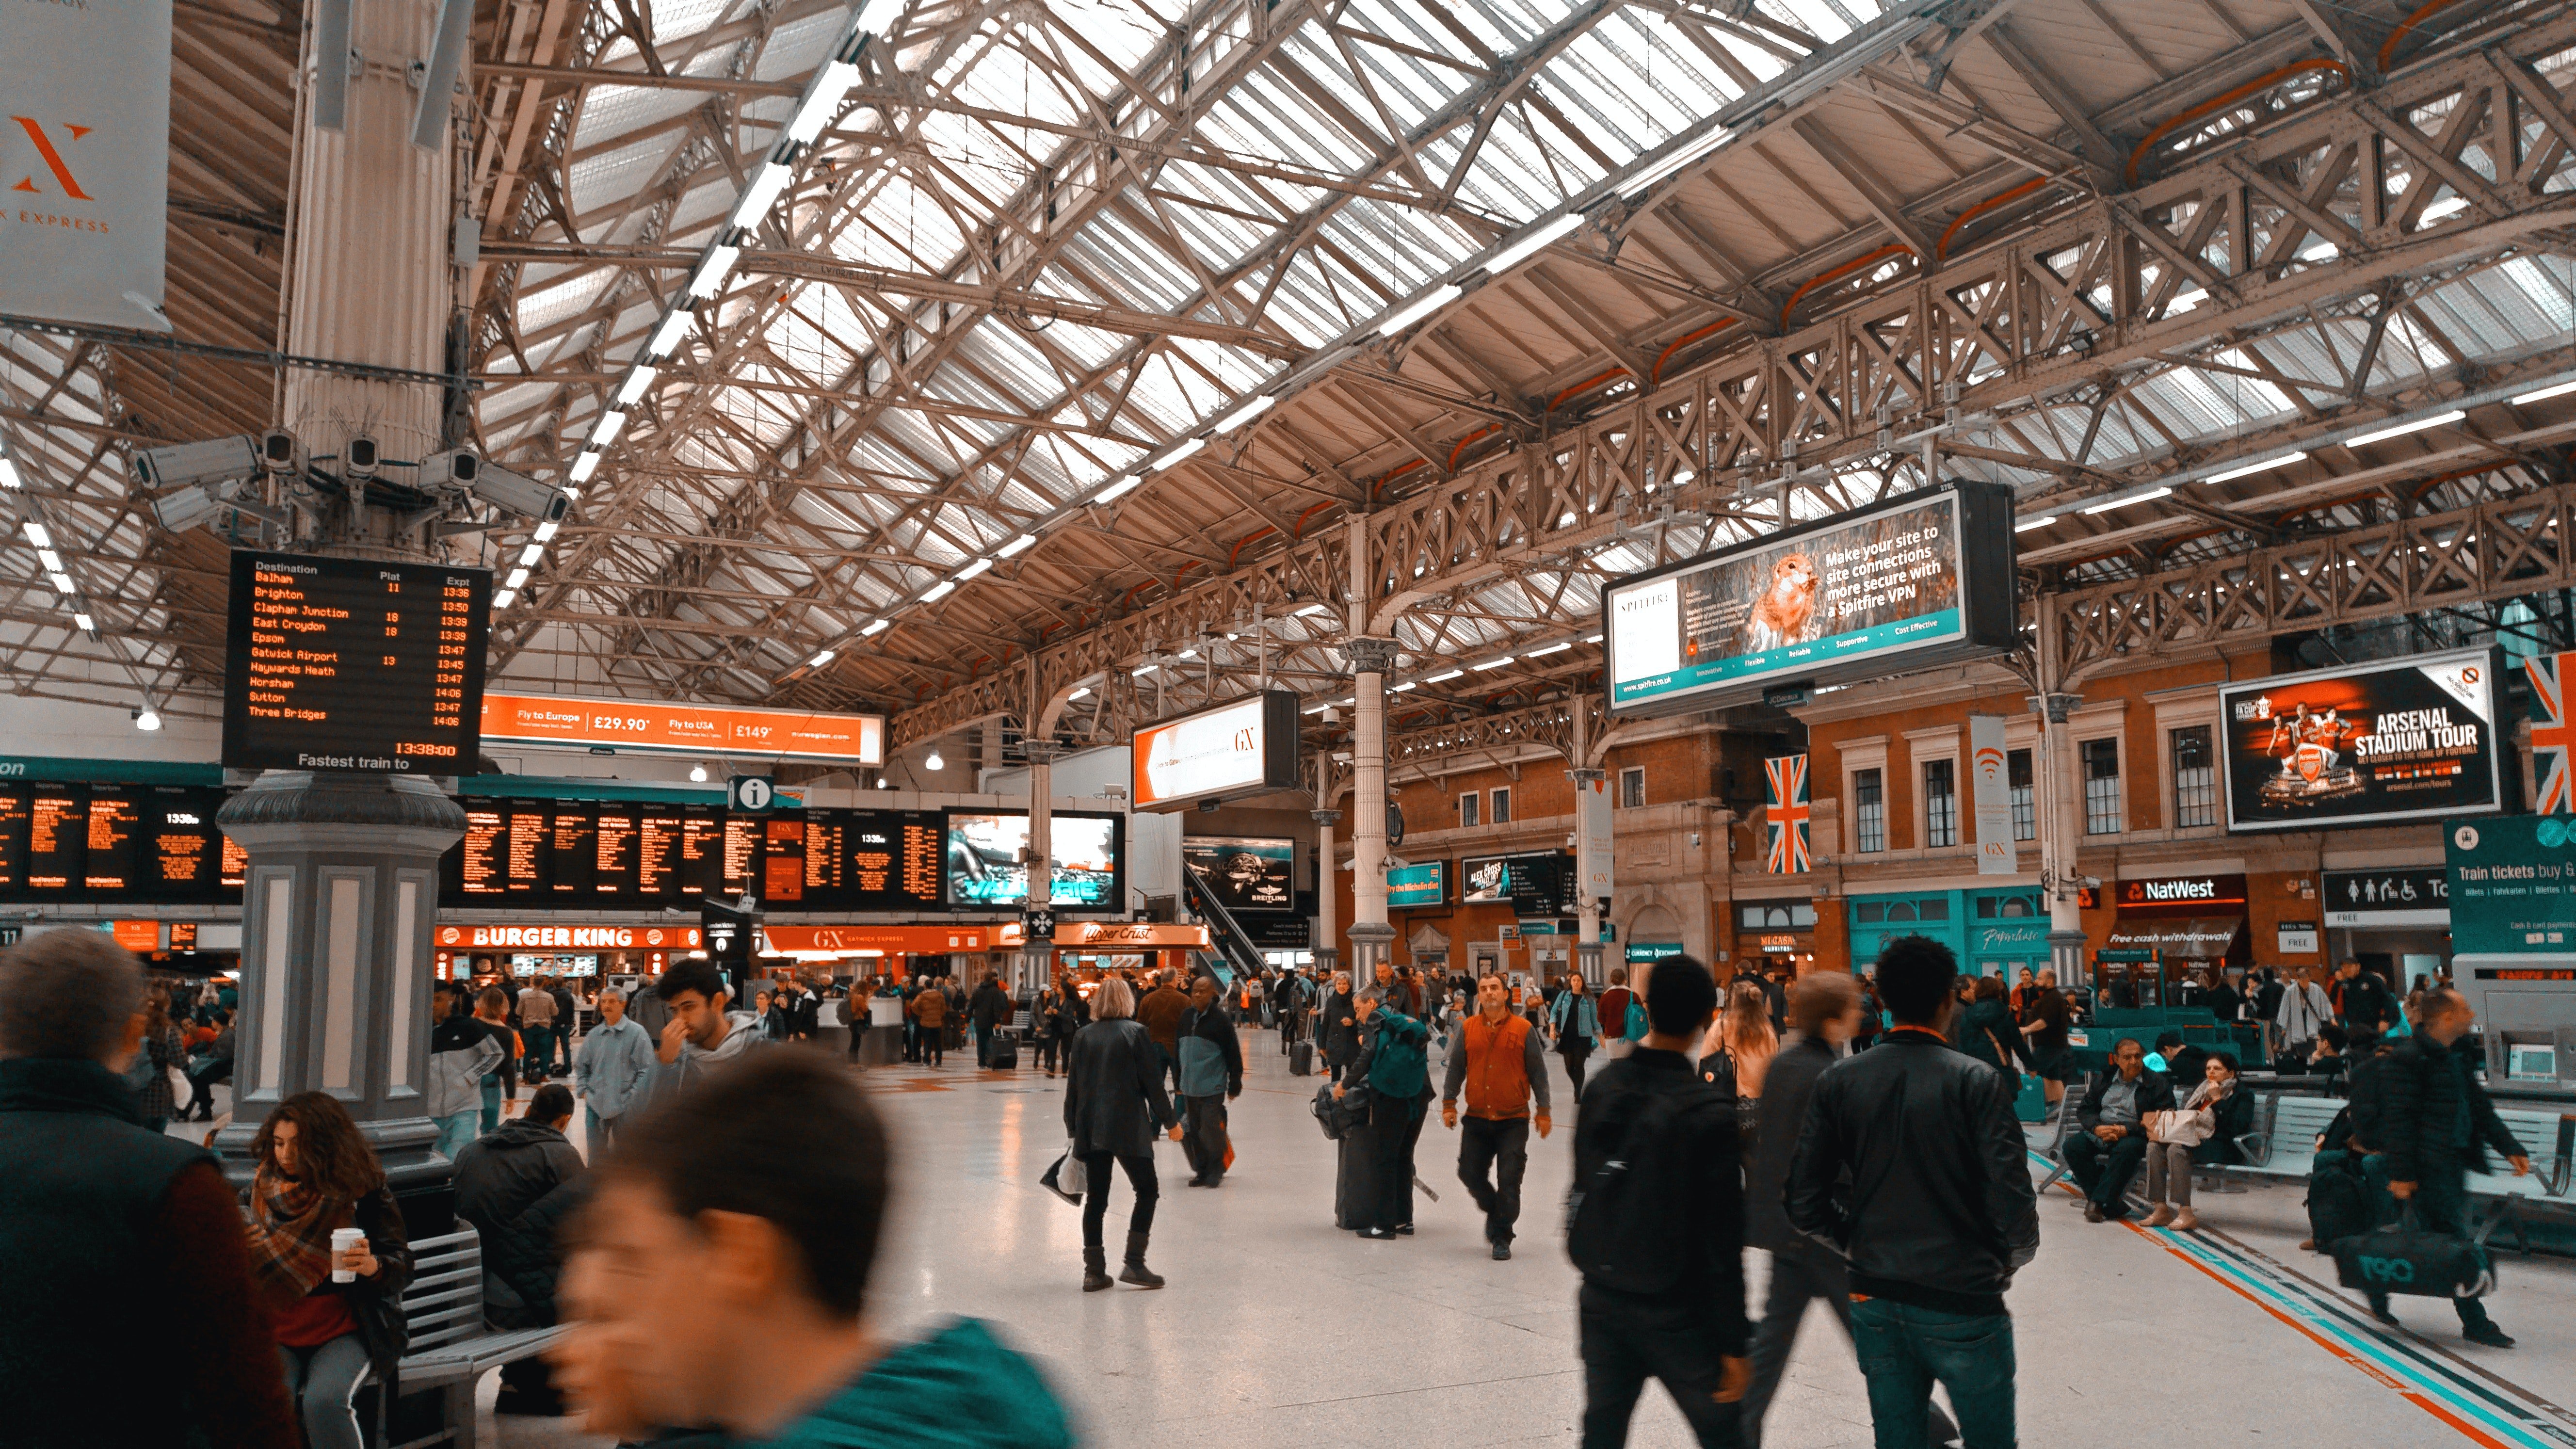 Simon worked at a busy railway station. | Source: Pexels